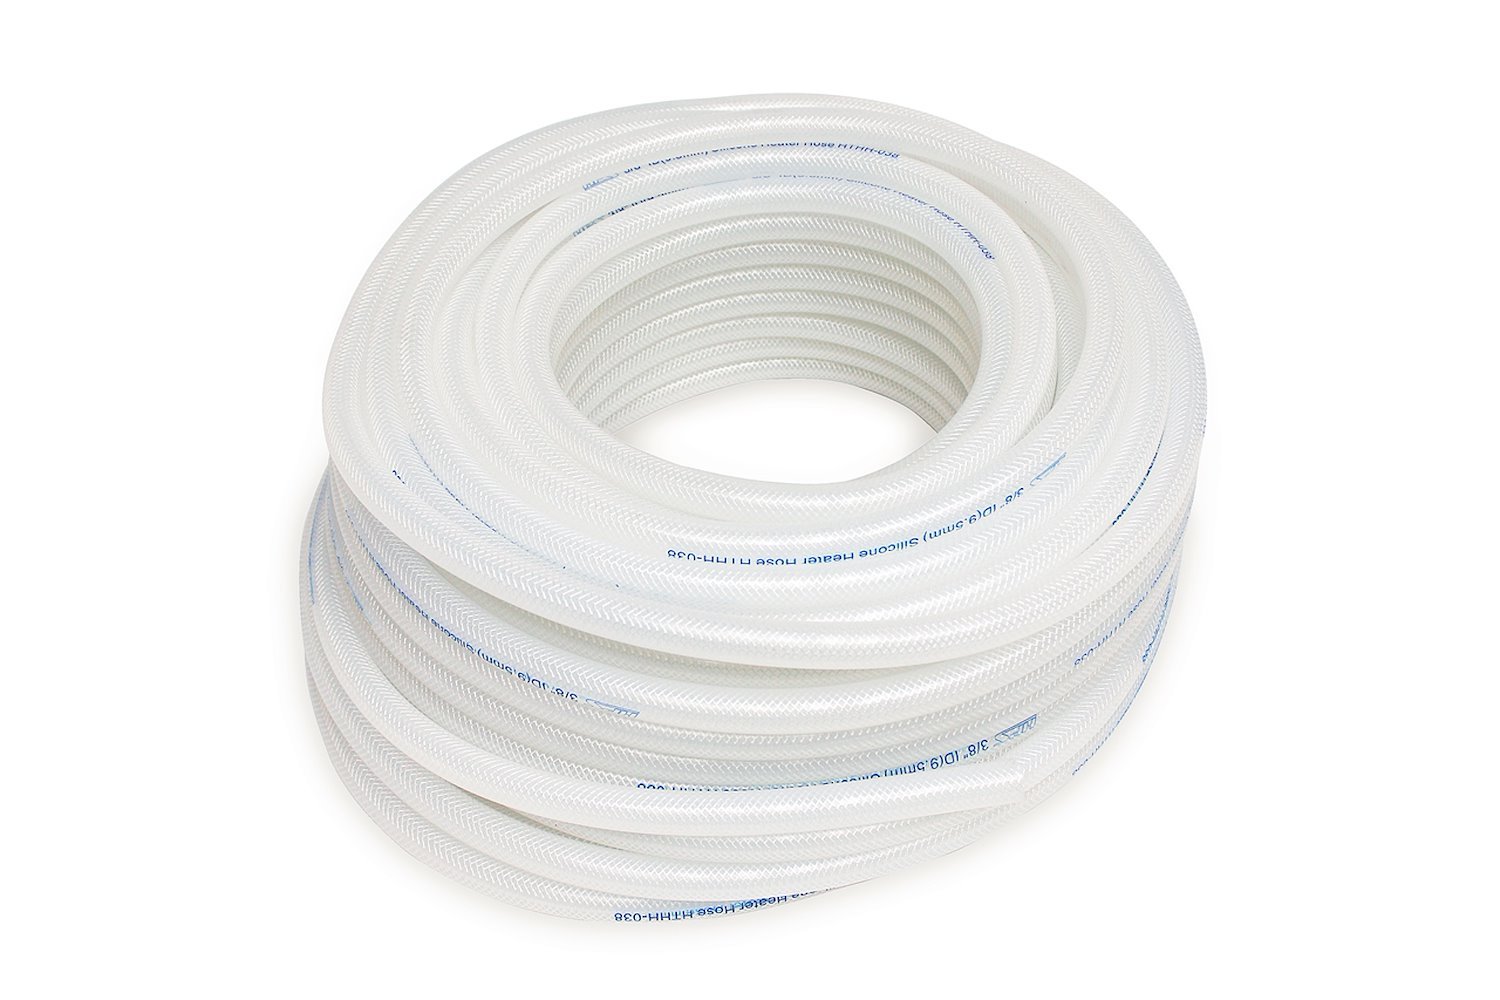 HTHH-013-CLEARx100 Silicone Heater Hose Tubing, High-Temp Reinforced, 1/8 in. ID, 100 ft. Roll, Clear